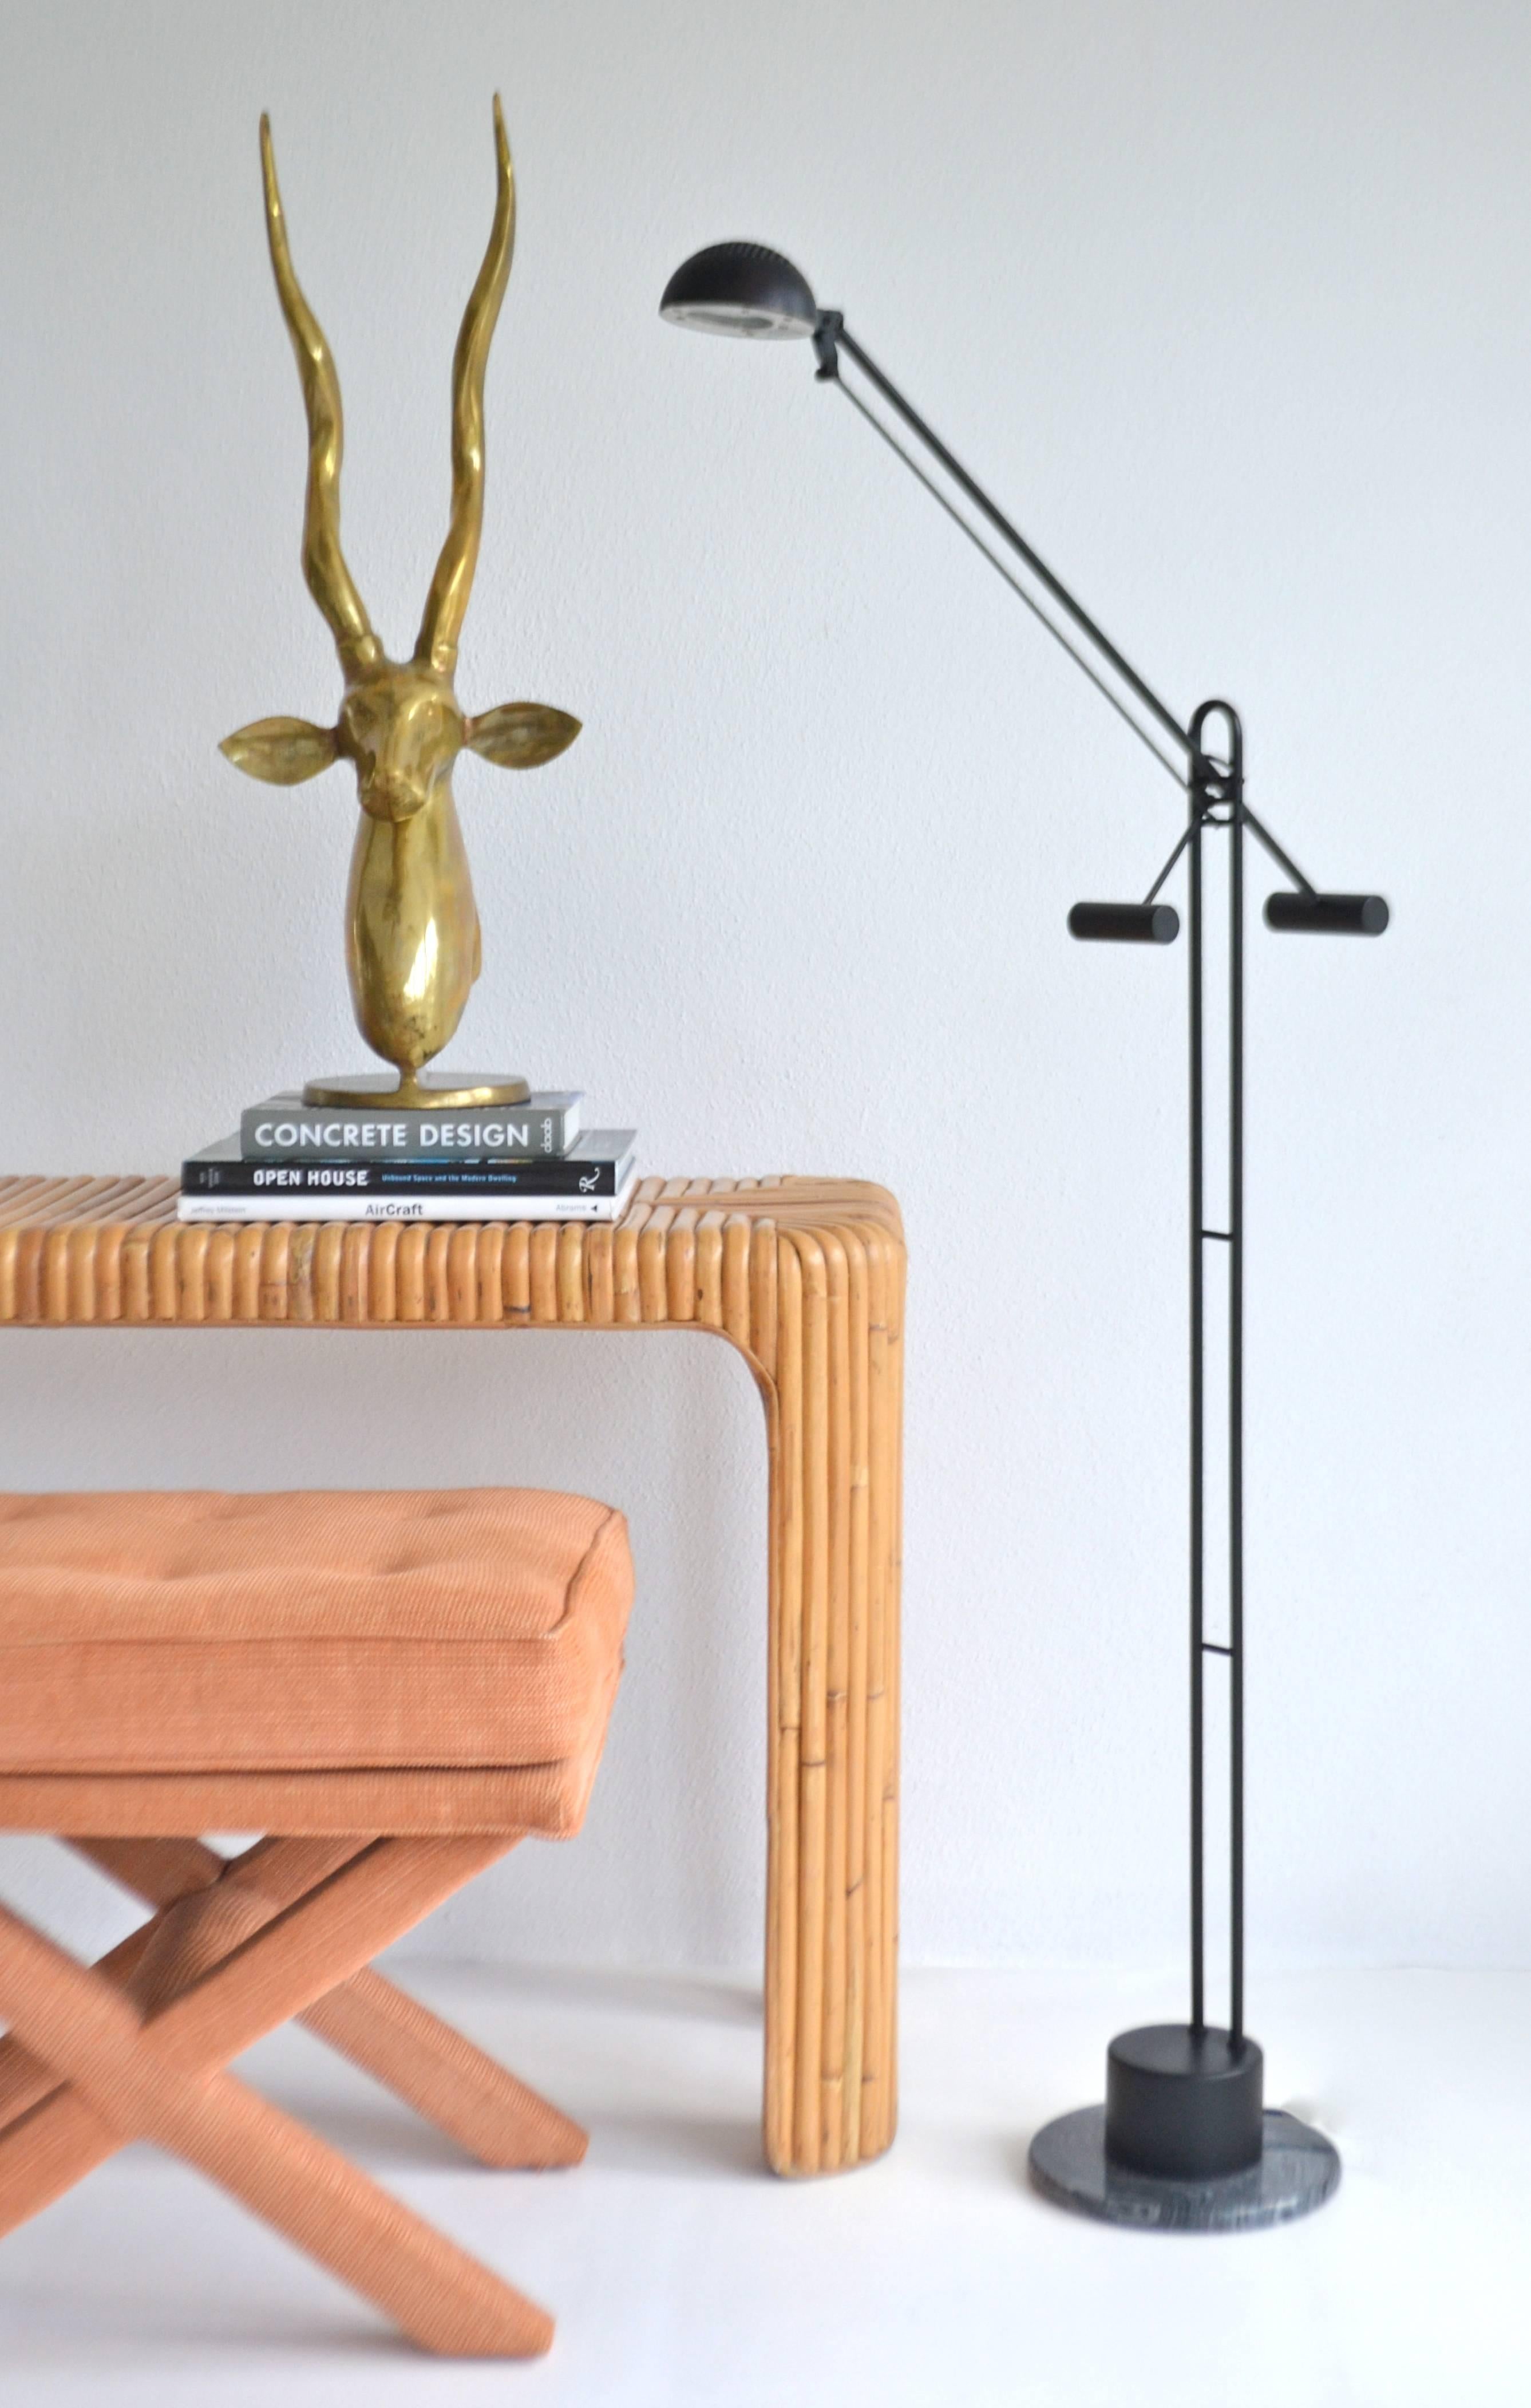 Architectural Postmodern articulated crane form floor lamp, circa 1980s. This striking sculptural standing lamp is designed to adjust to cantilevered positions of various heights and angles through a series of mechanical gears and counter weights.